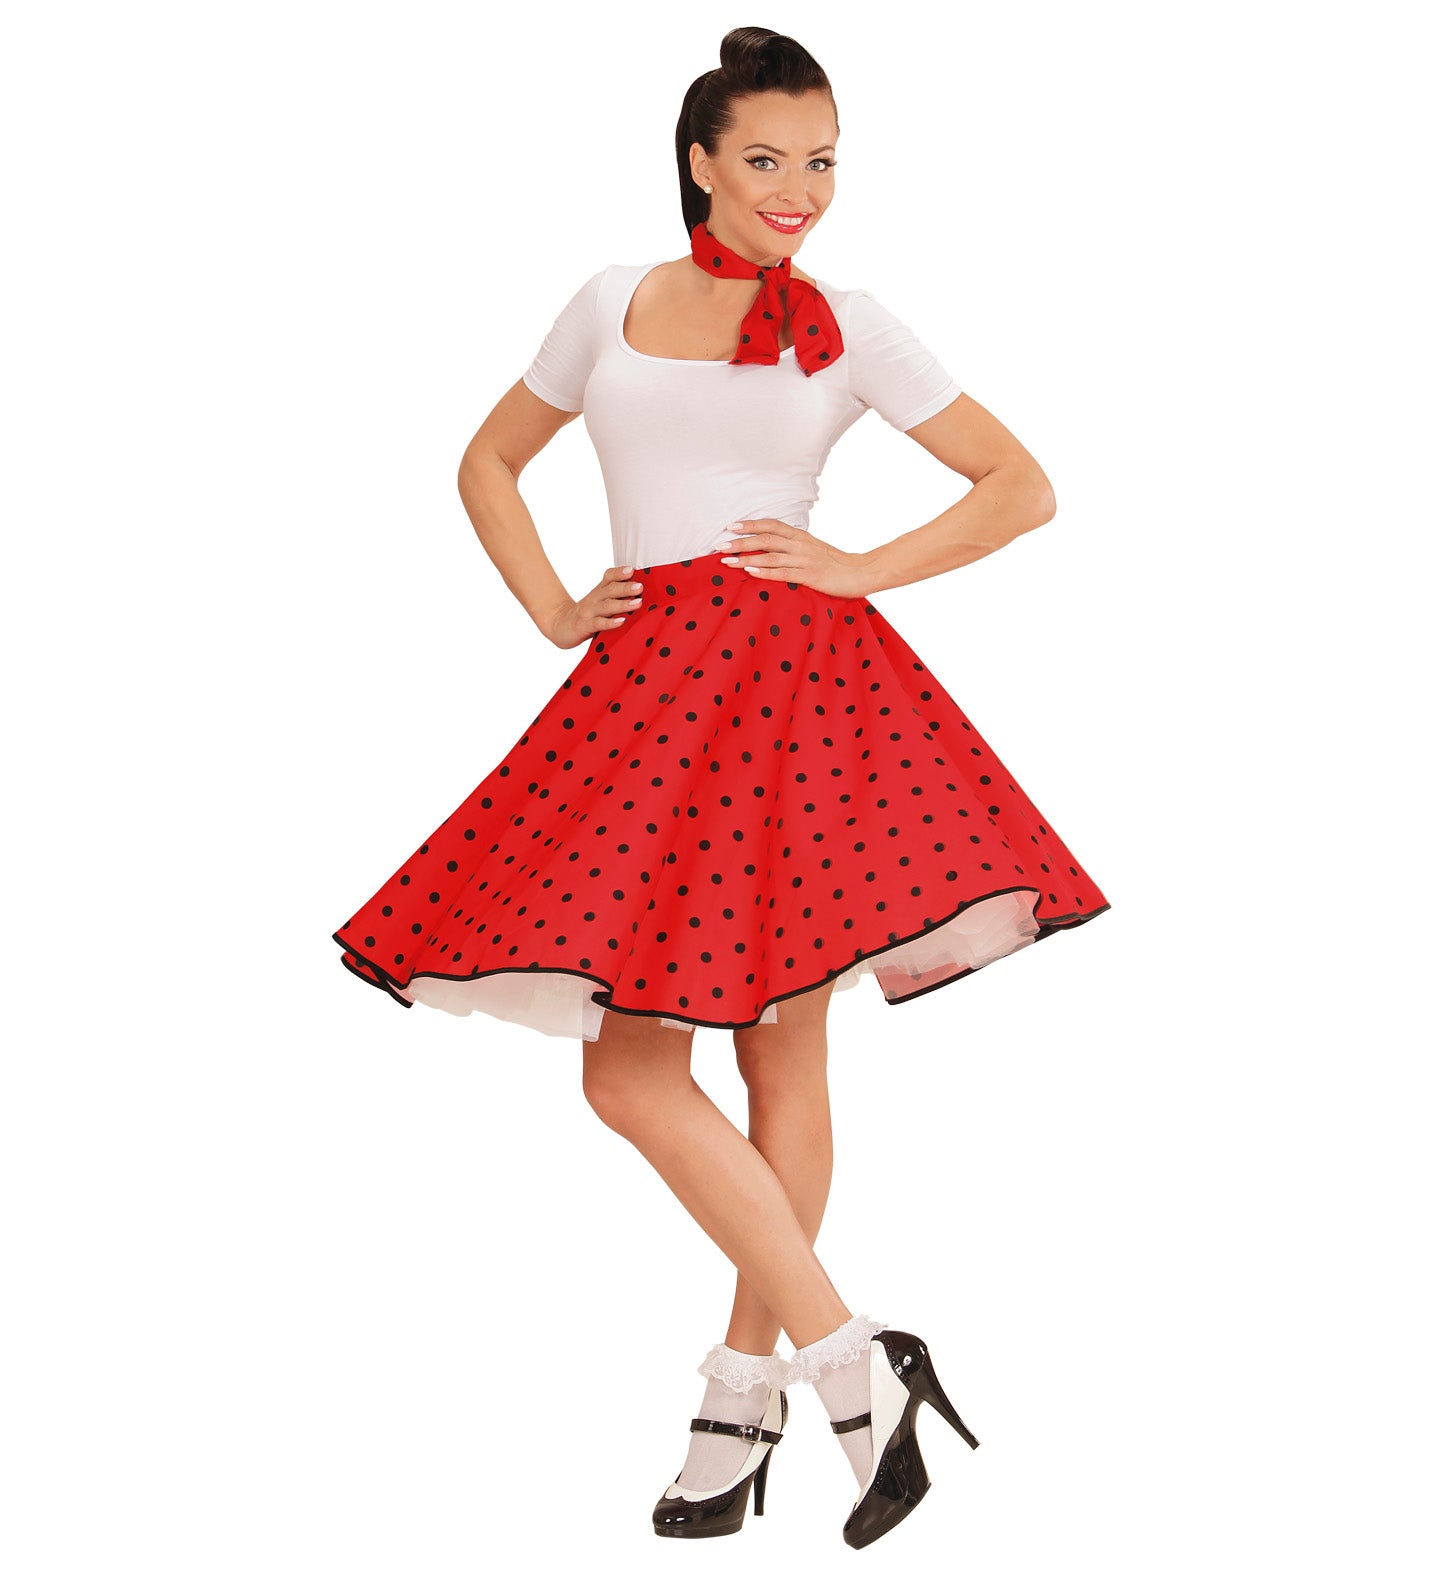 50's Rockabilly Red Polka Dot Skirt outfit and Neckscarf